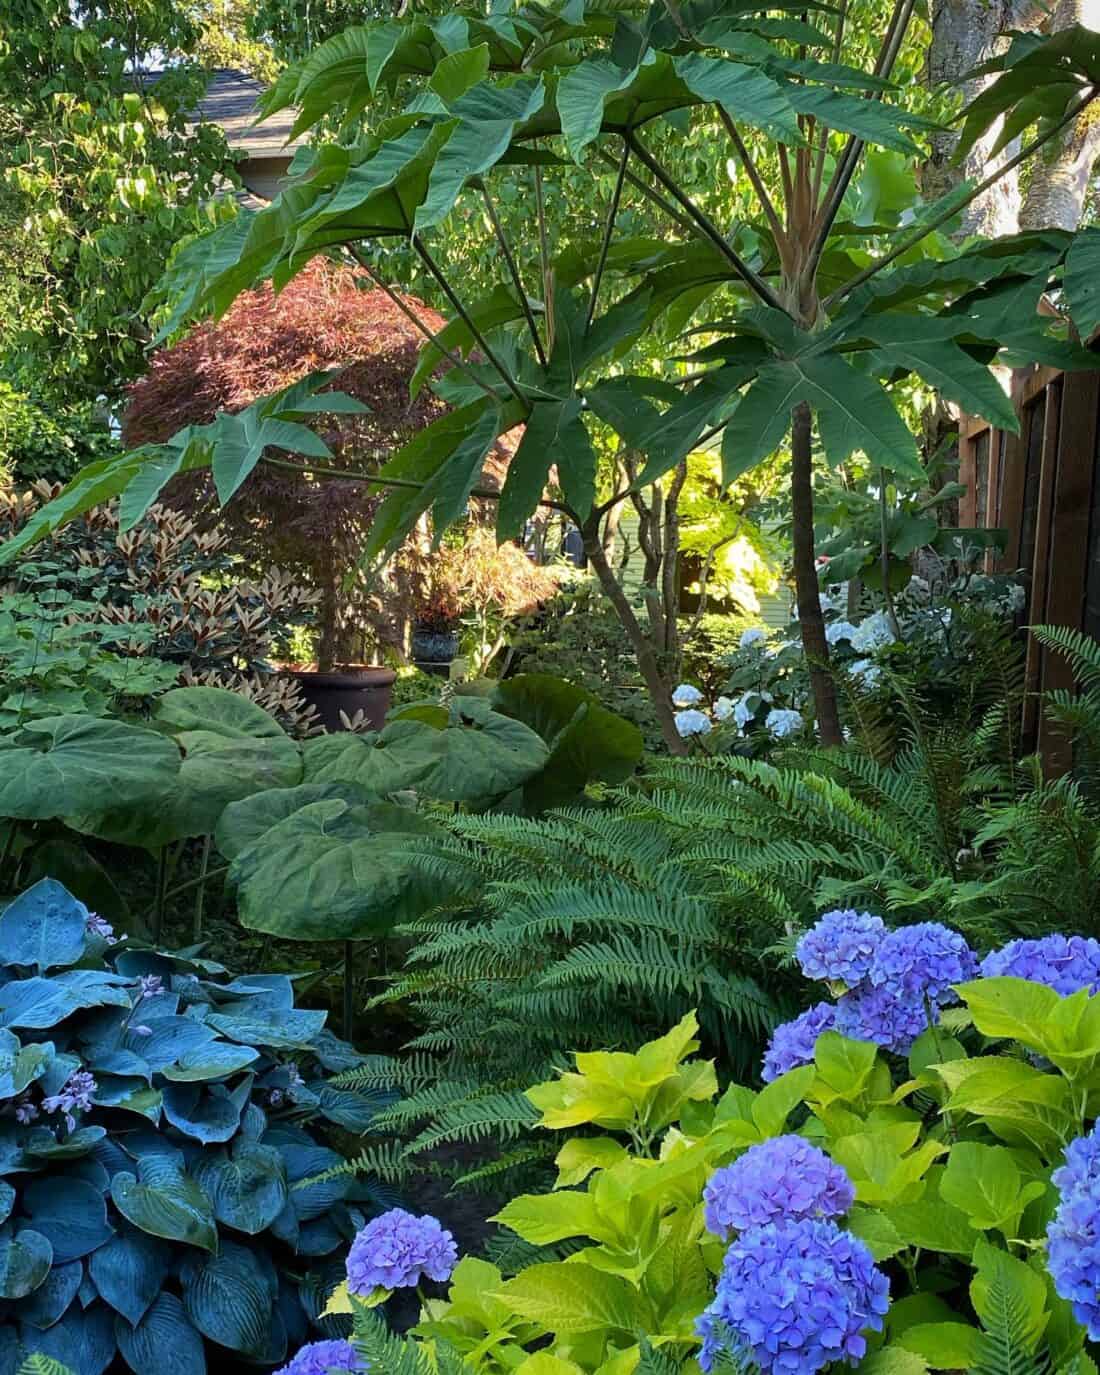 A lush garden features large-leafed plants, petasites japonicus, hostas, ferns, and vibrant blue and purple hydrangeas in the foreground. Sunlight filters through the dense green foliage, creating a serene and inviting atmosphere.